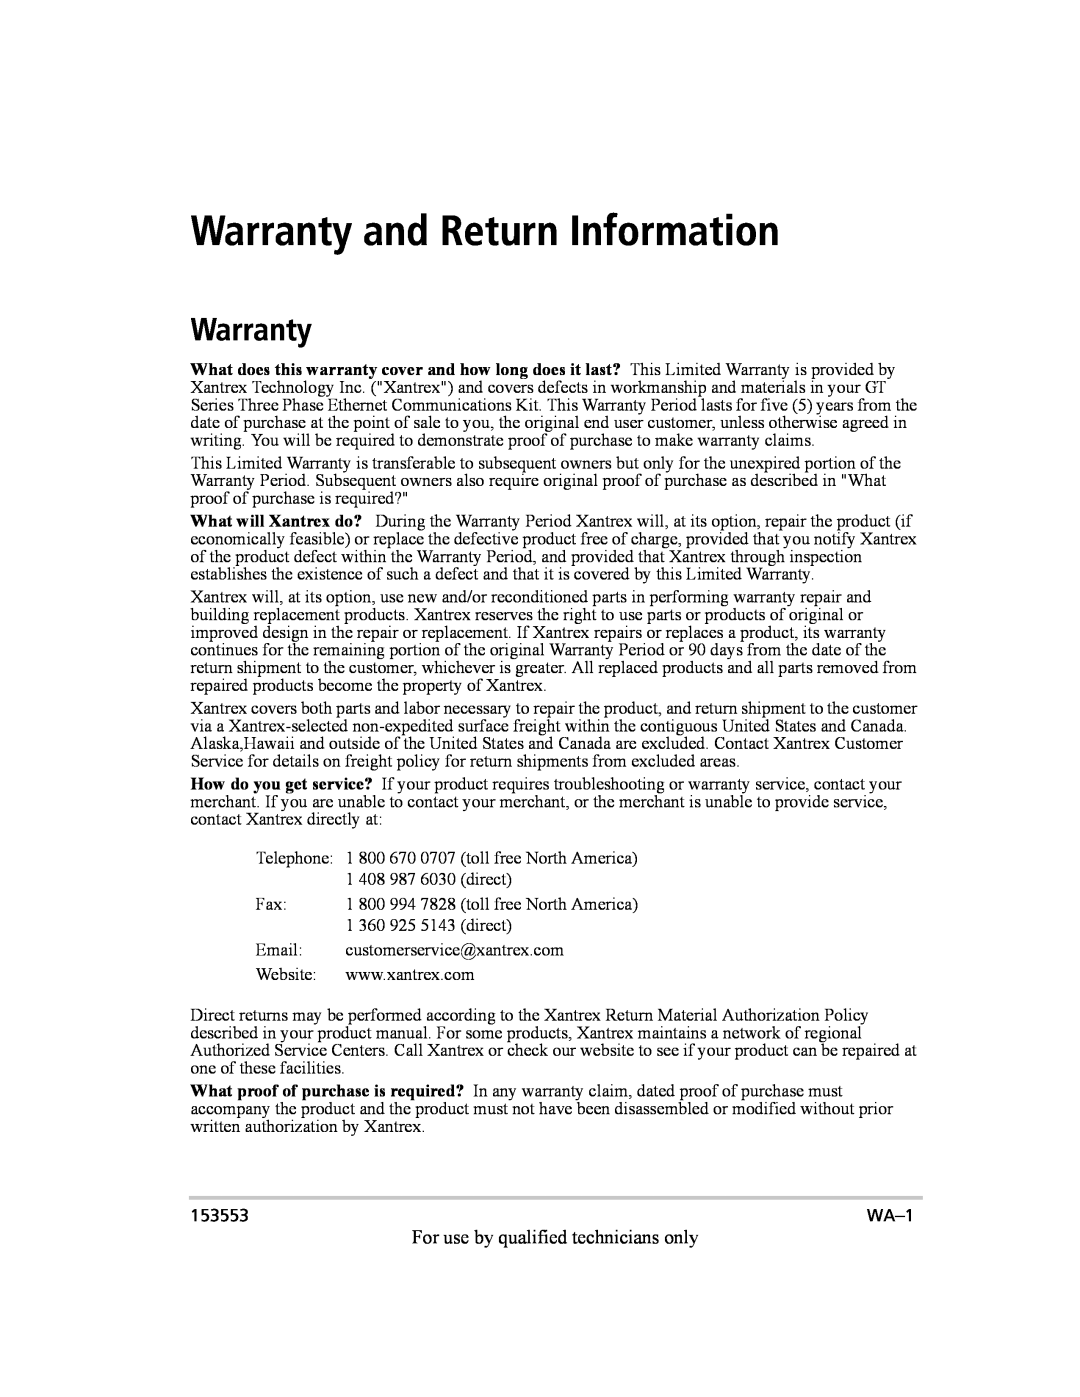 Xantrex Technology GT Series manual Warranty and Return Information 